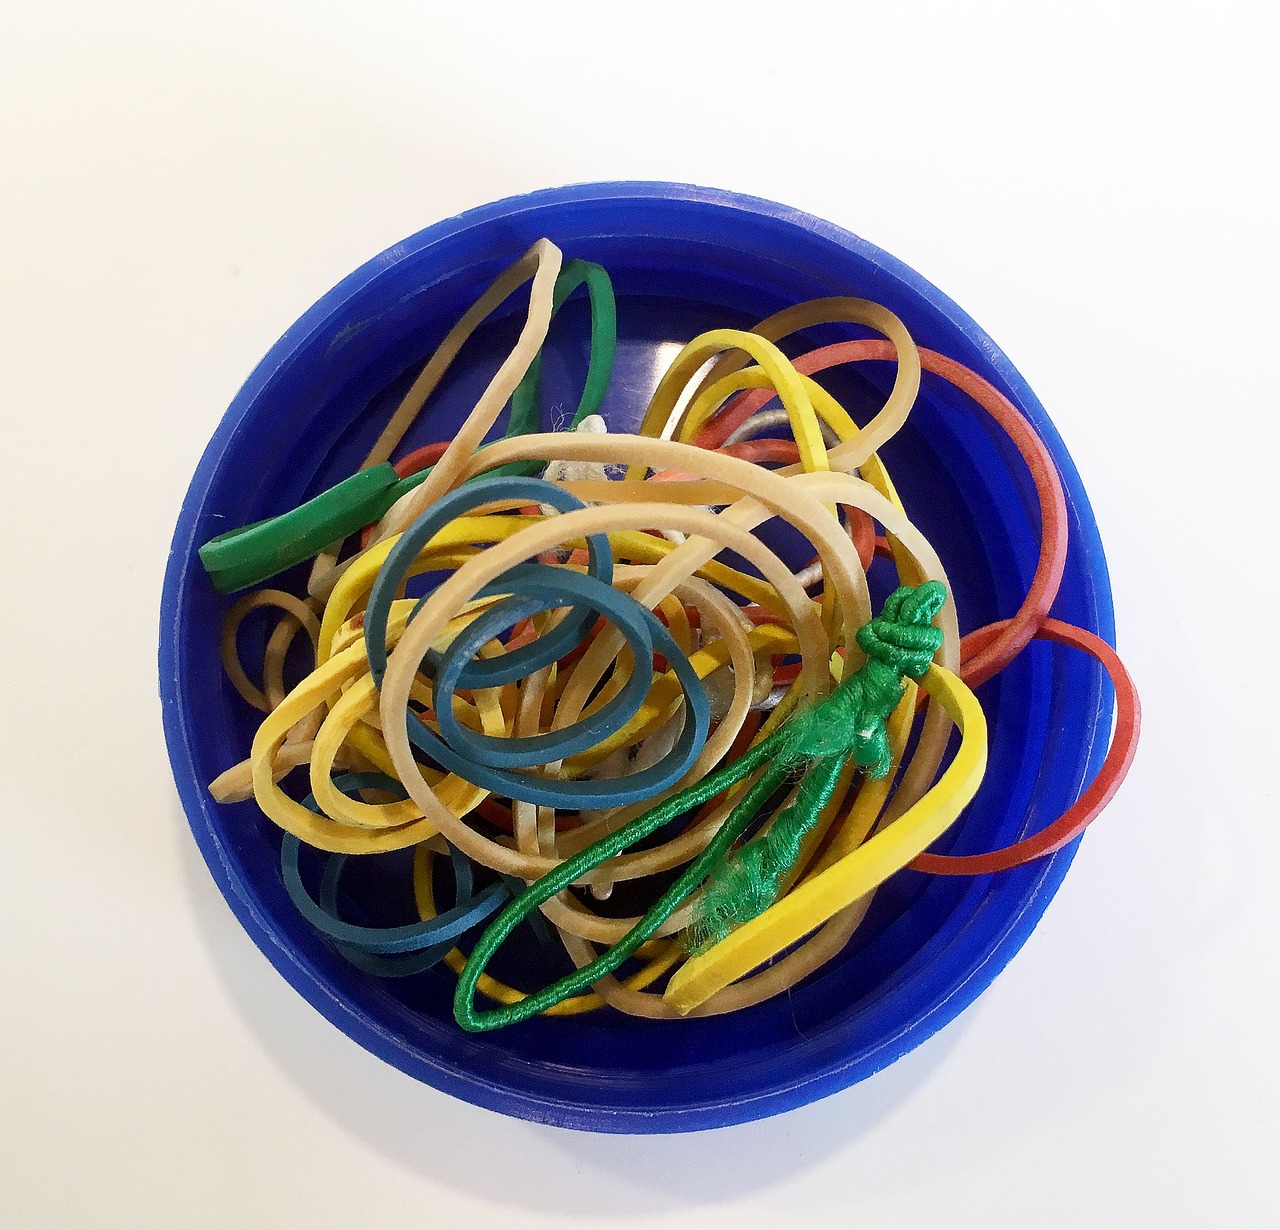 rubber rings rubber bands office free photo